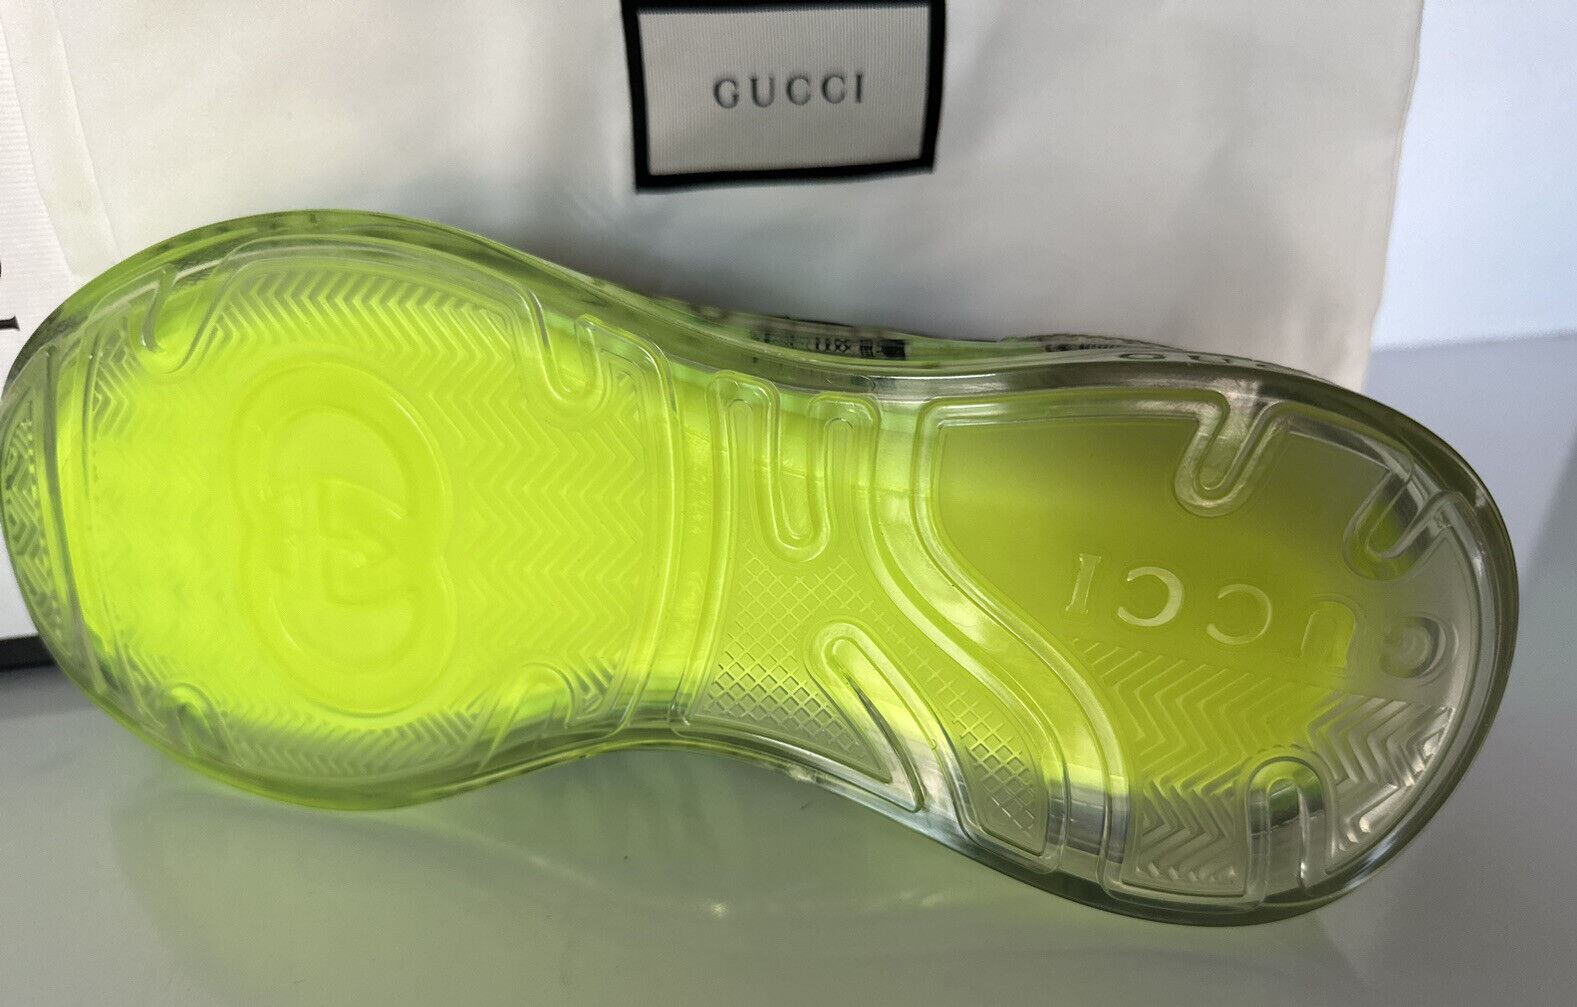 NIB Gucci Ultrapace R Sneakers In Black and Green 8.5 US (Gucci 8) 620337 IT